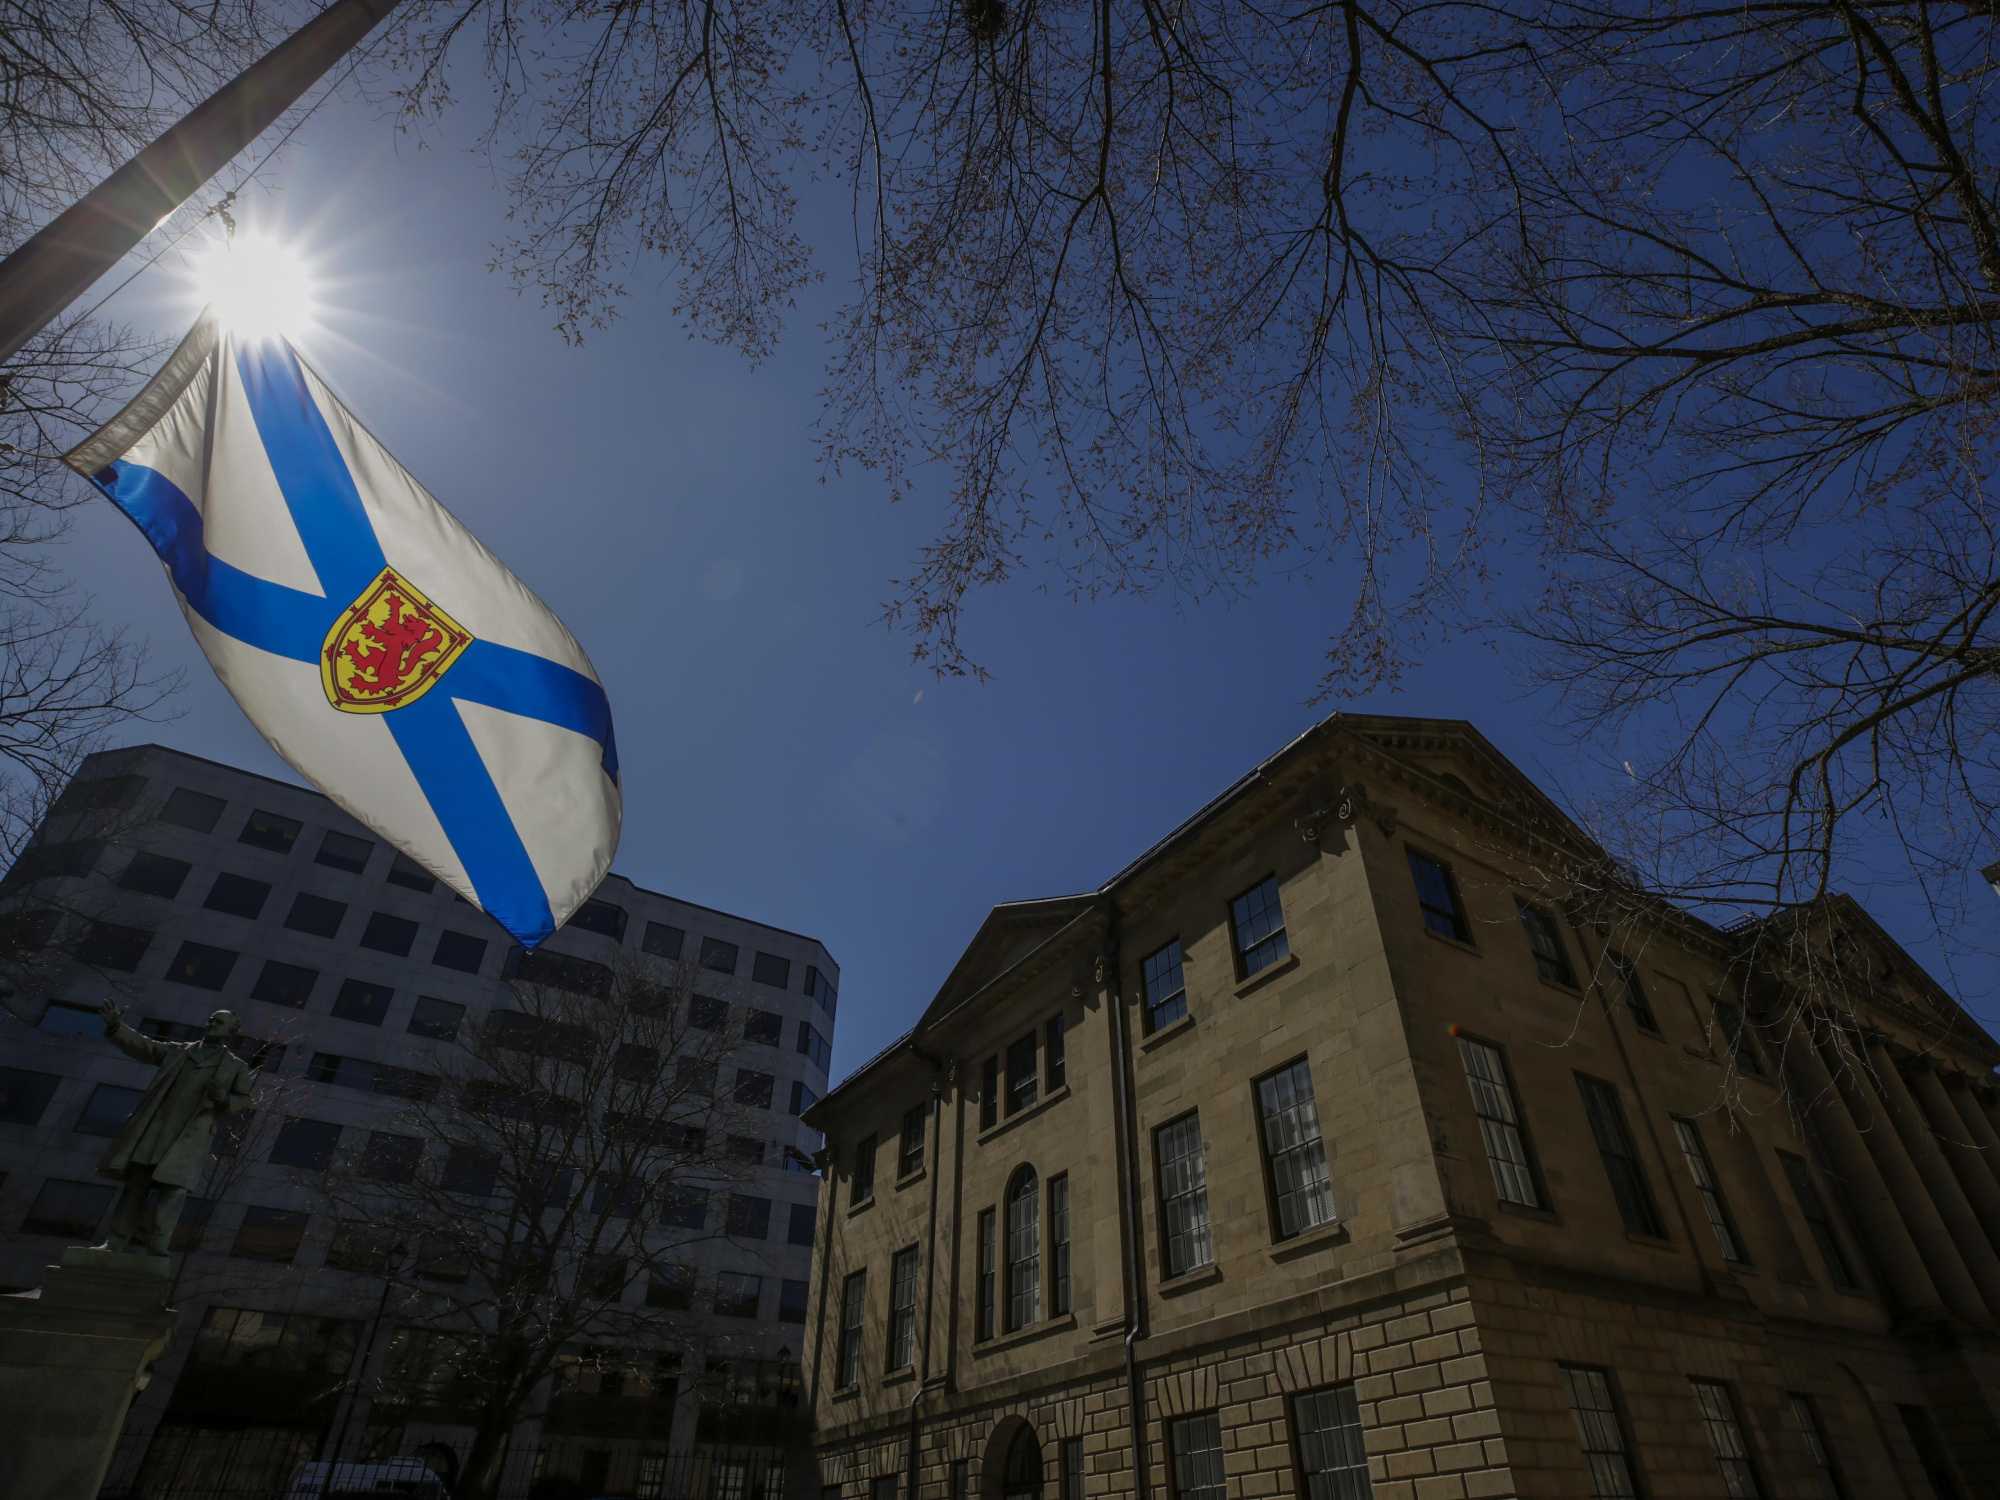 The Nova Scotia flag flies at half-mast in 2023, in honour of those who lost their lives, survivors and everyone impacted by the tragic events of April 18-19, 2020 (Communications Nova Scotia / File)